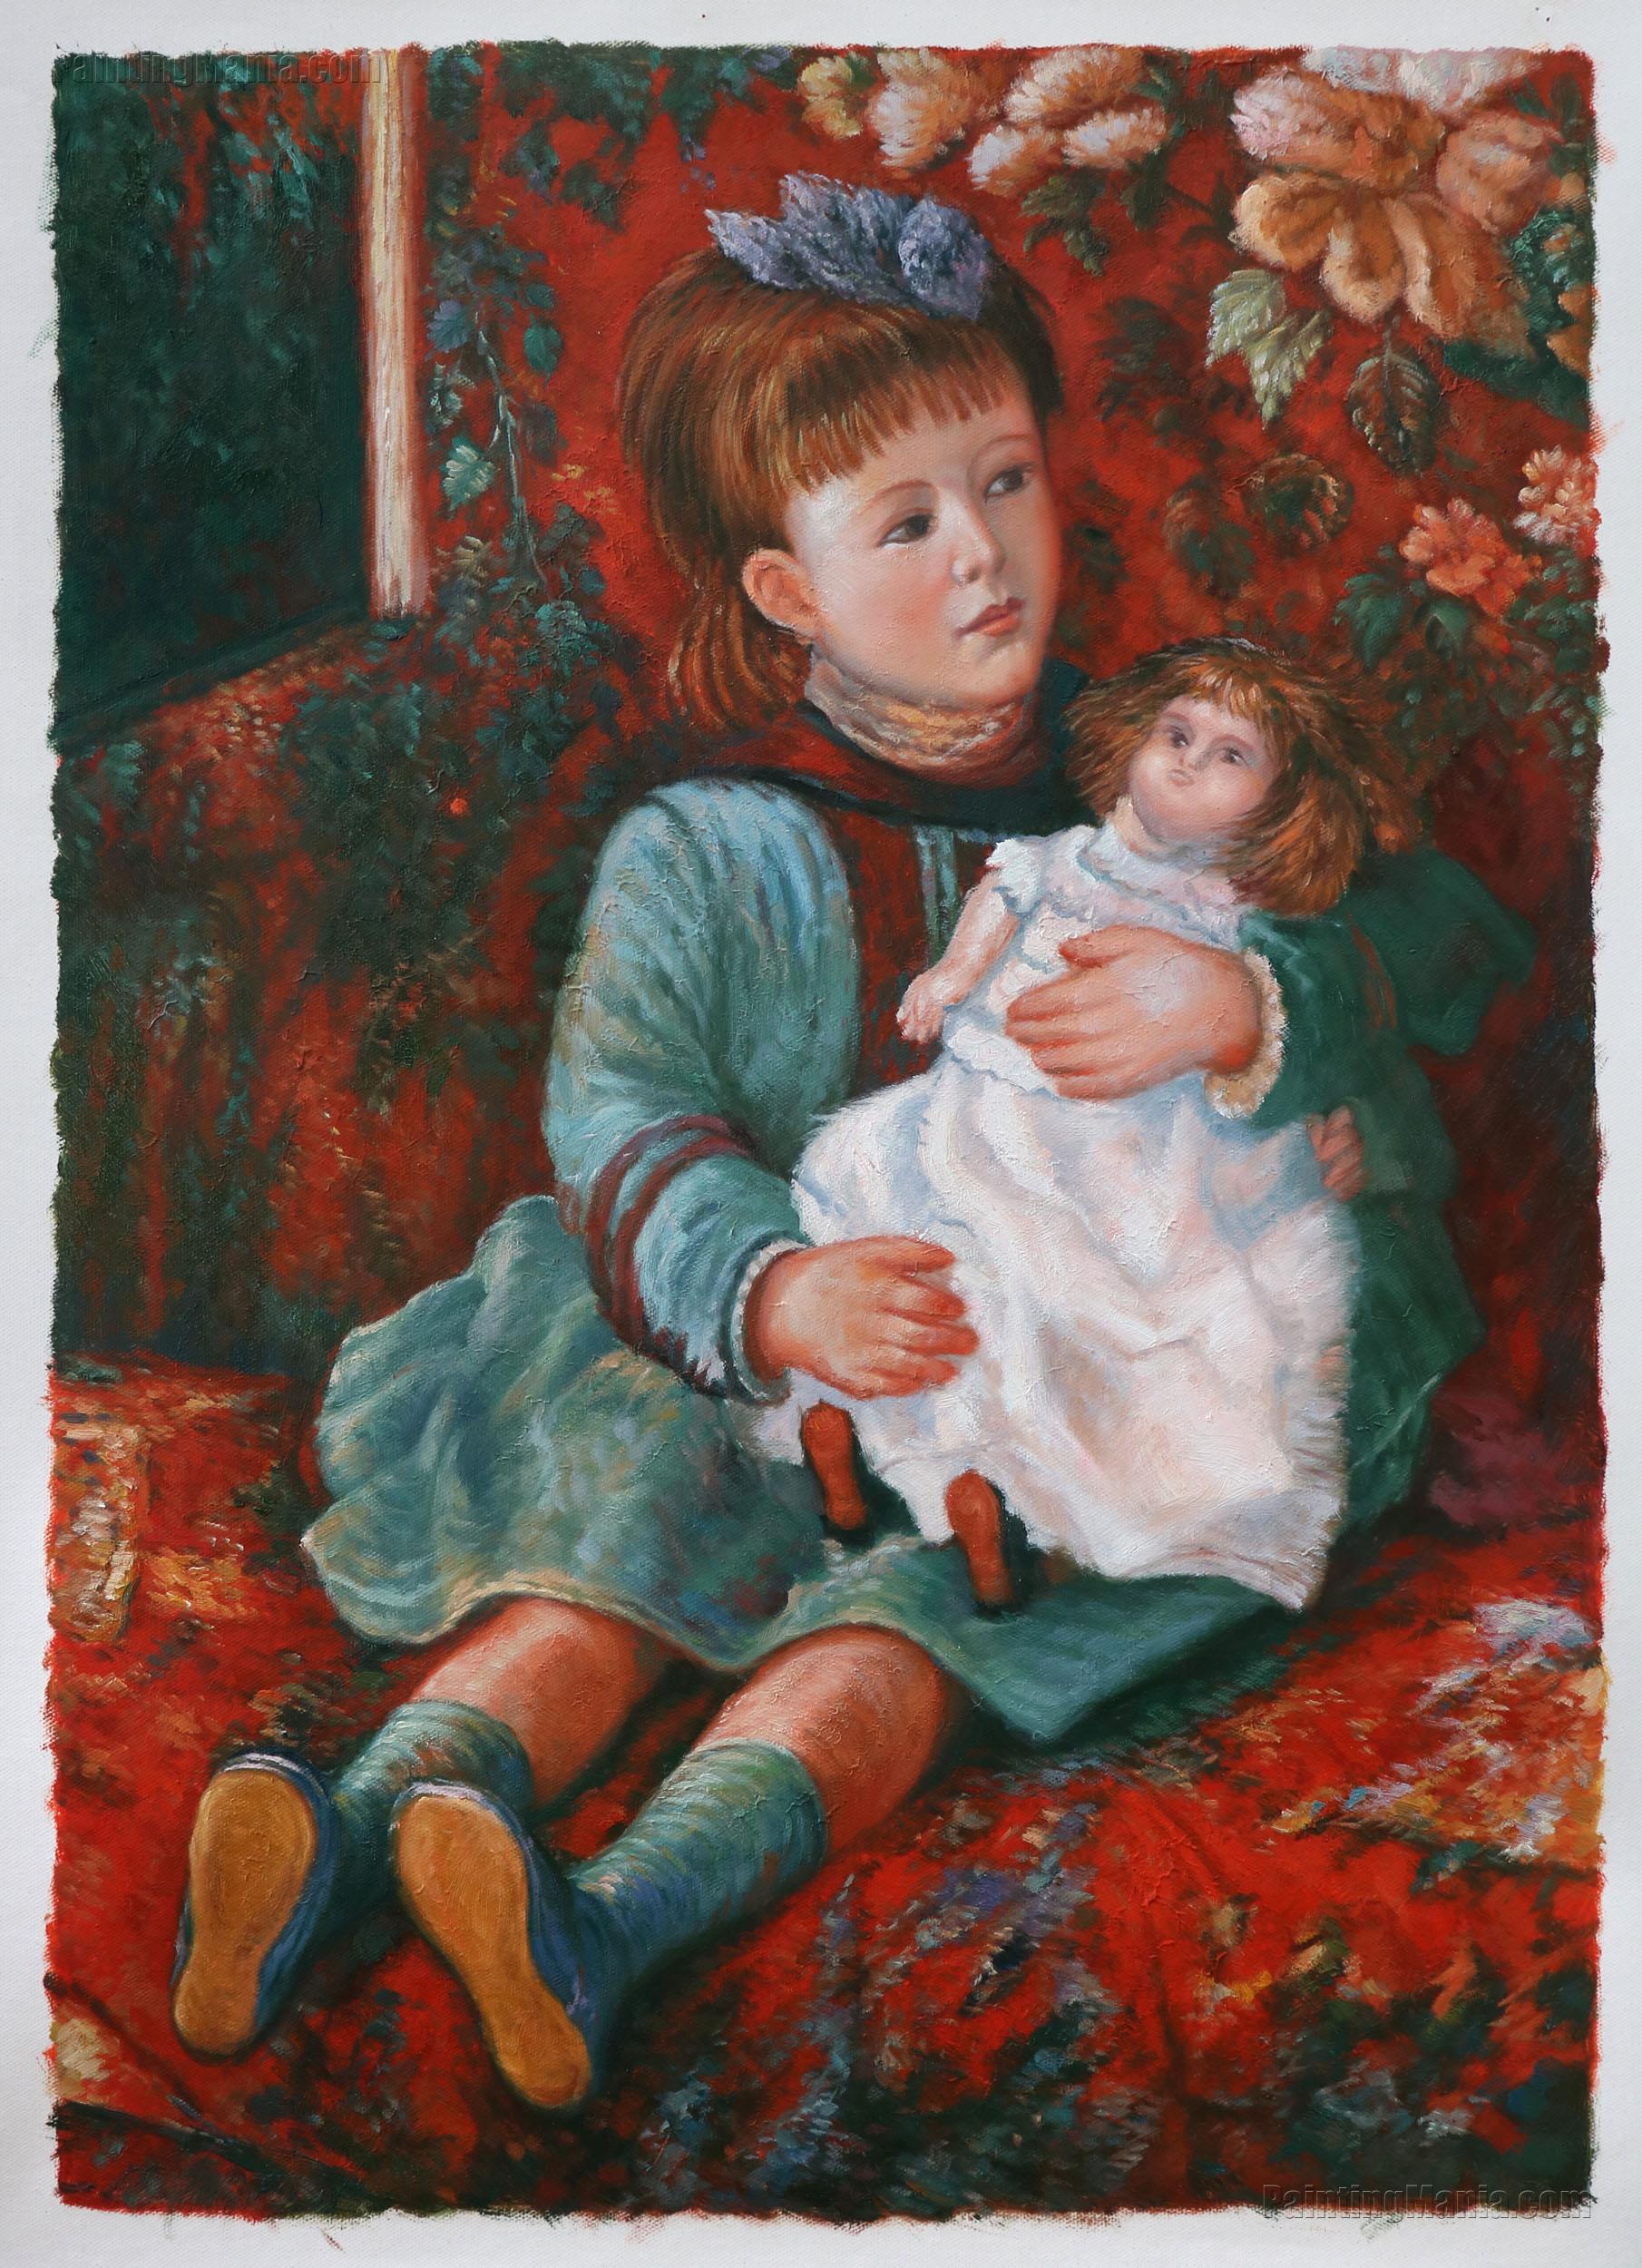 Portrait of Germaine Hoschede with a Doll